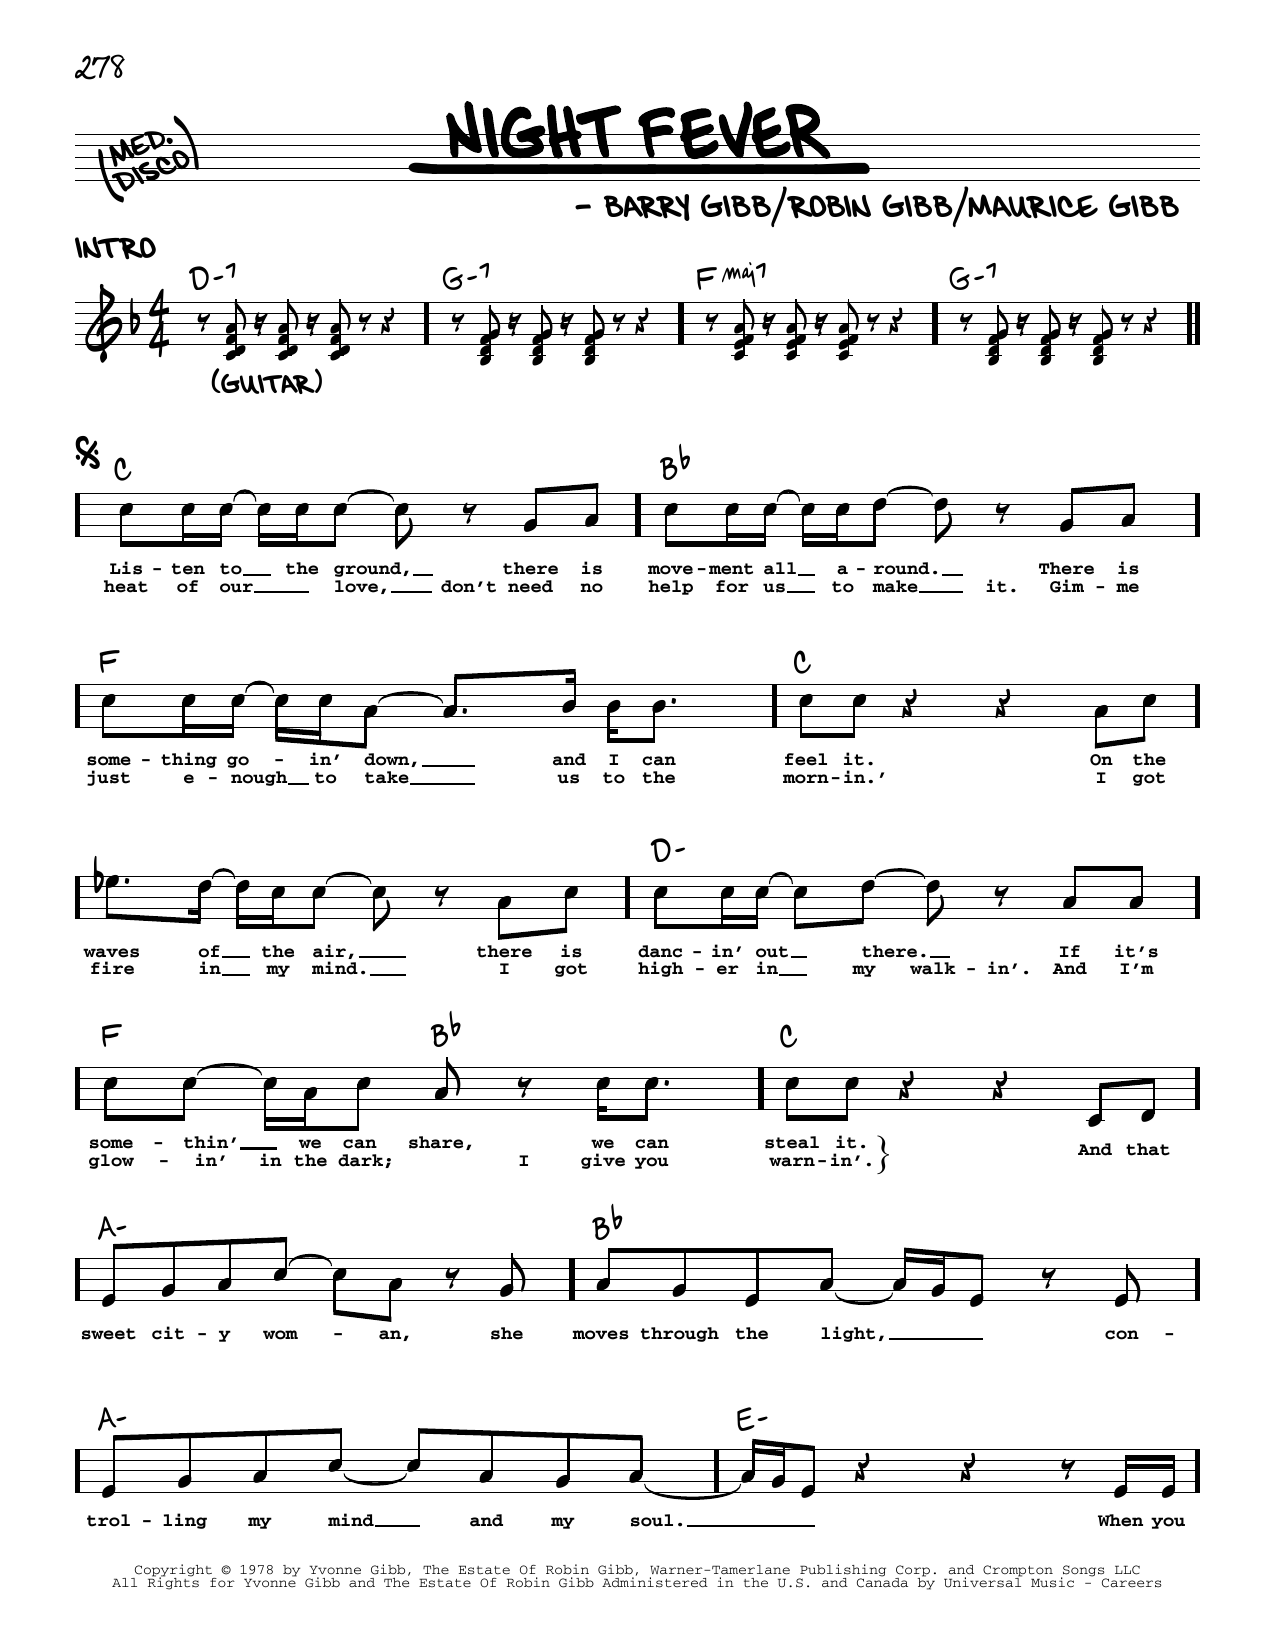 Download The Bee Gees Night Fever Sheet Music